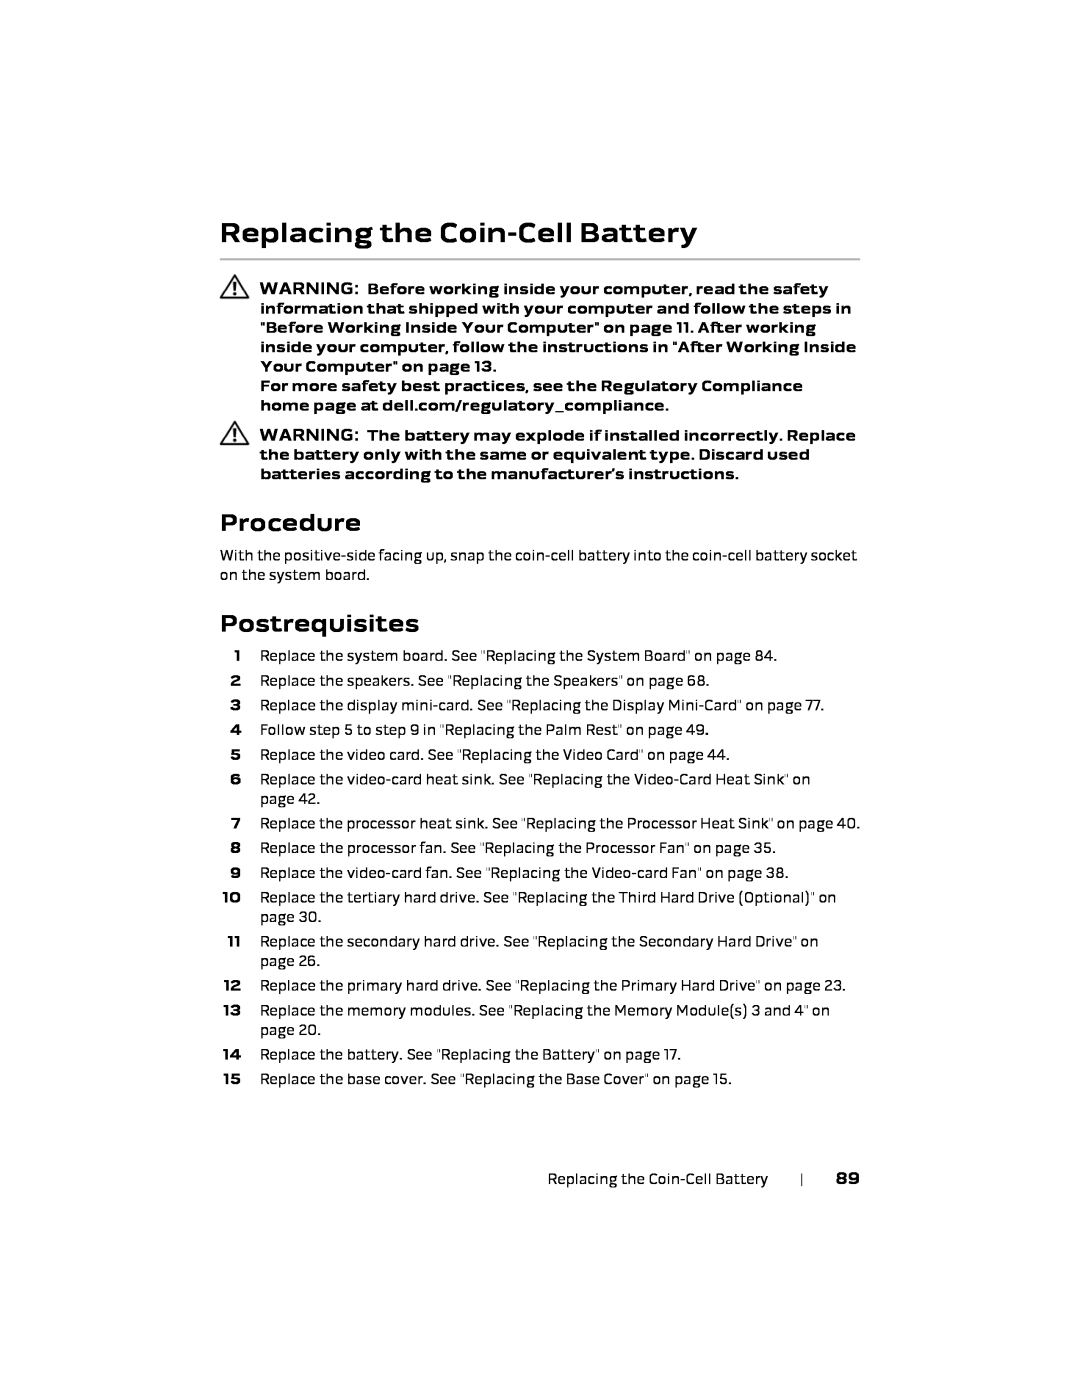 Alienware 17 R1, P18E owner manual Replacing the Coin-Cell Battery, Procedure, Postrequisites 